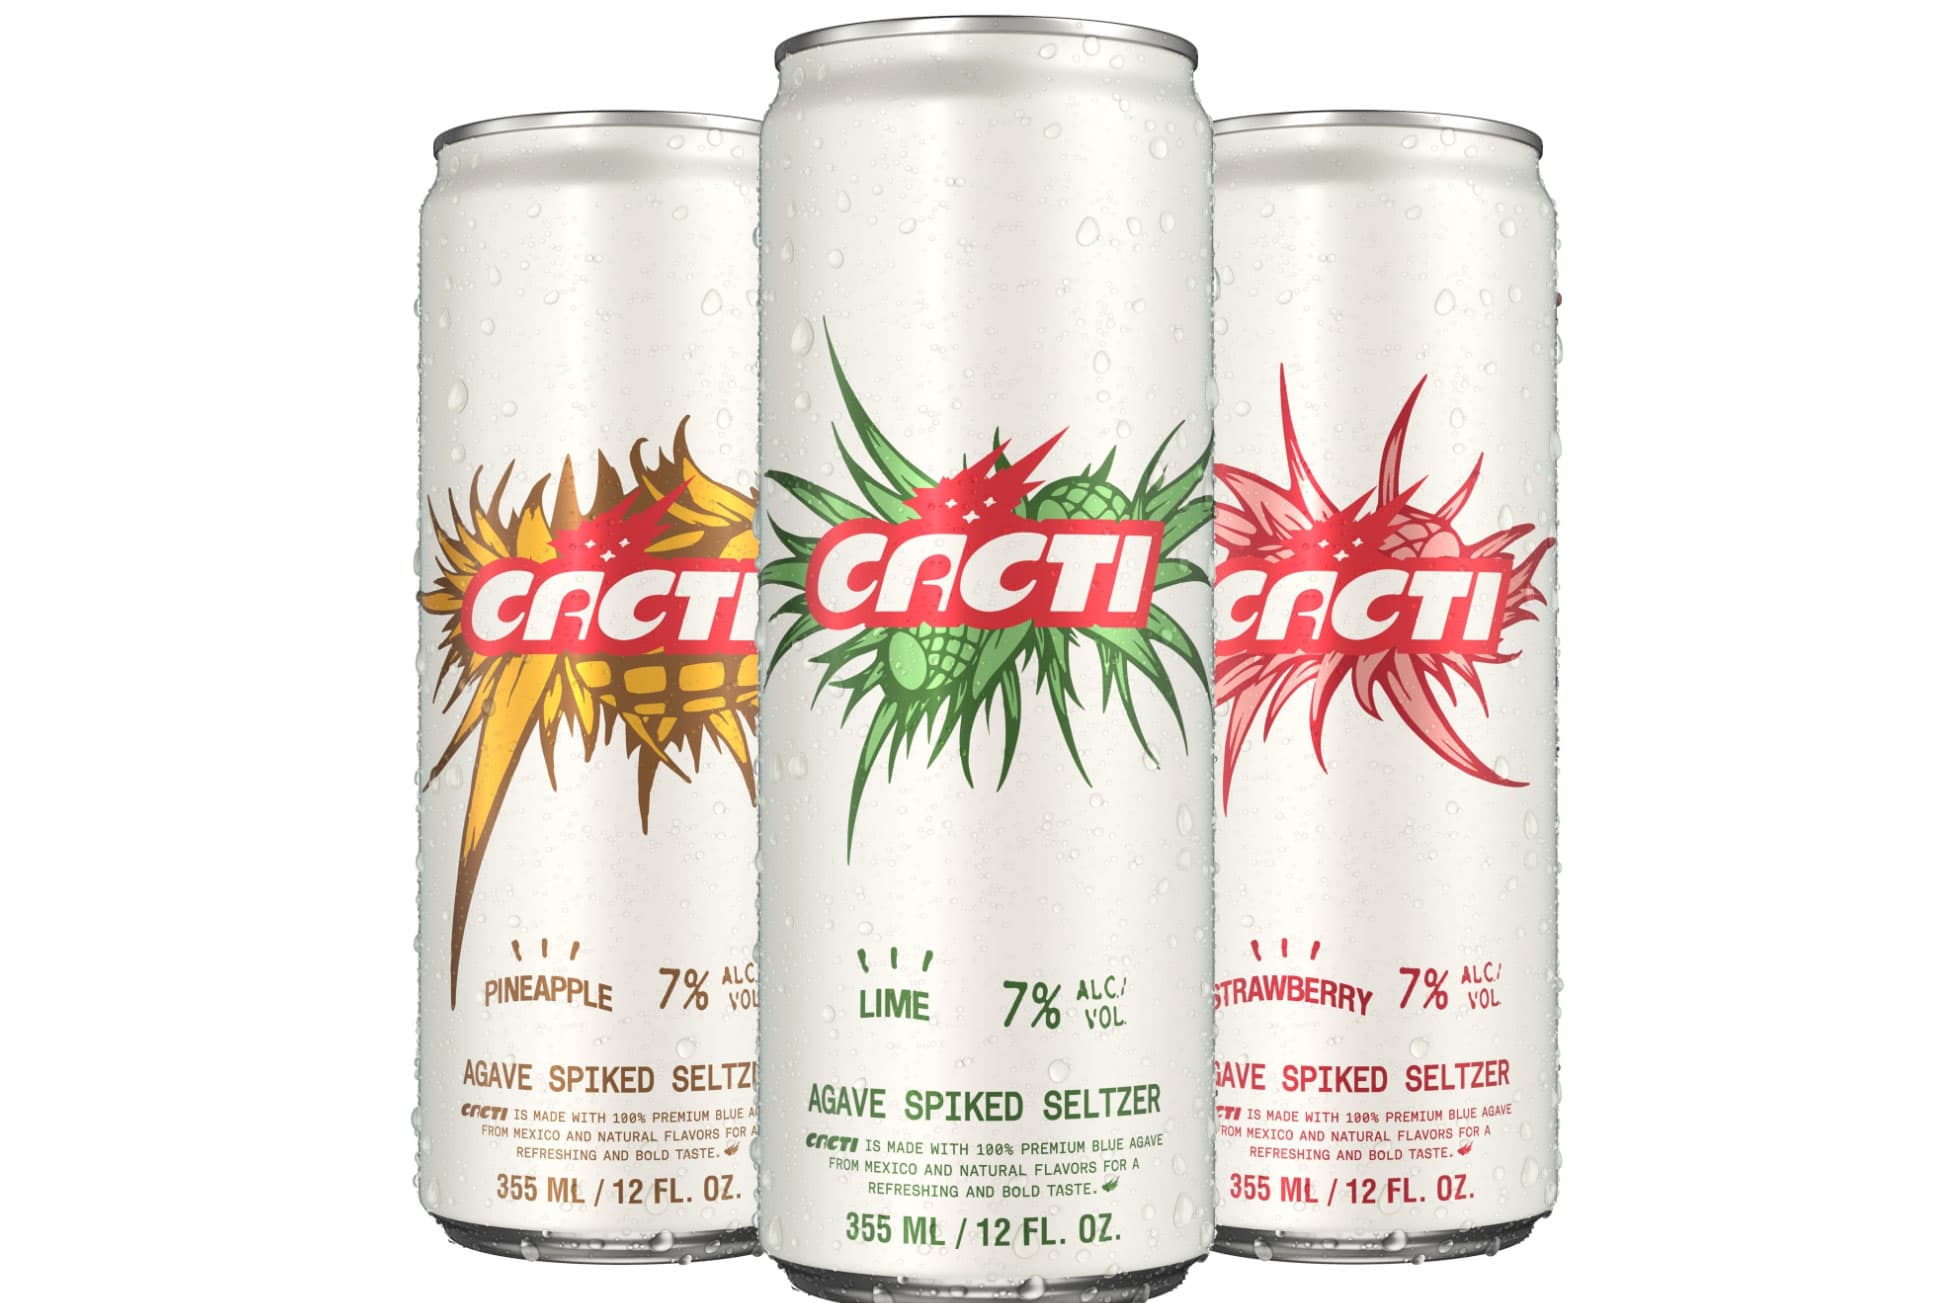 Anheuser-Busch CEO on the success of Cacti Hard Seltzer, supported by Travis Scott